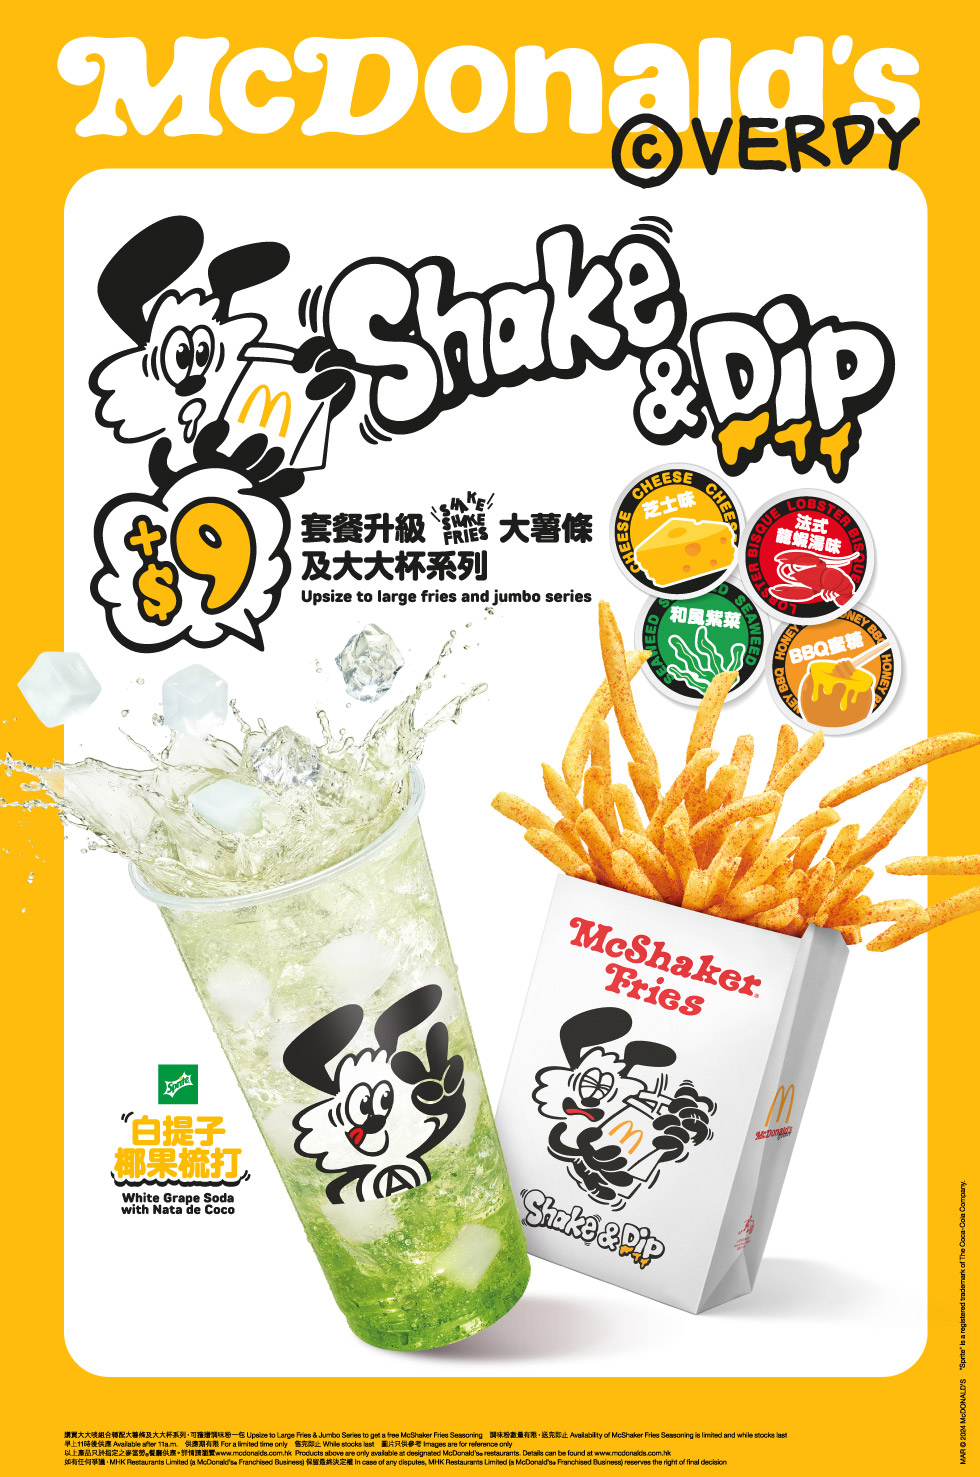 McDonald's Shake & Dip! The limited time offer McNugget sauces and McShaker Fries🍟are back!